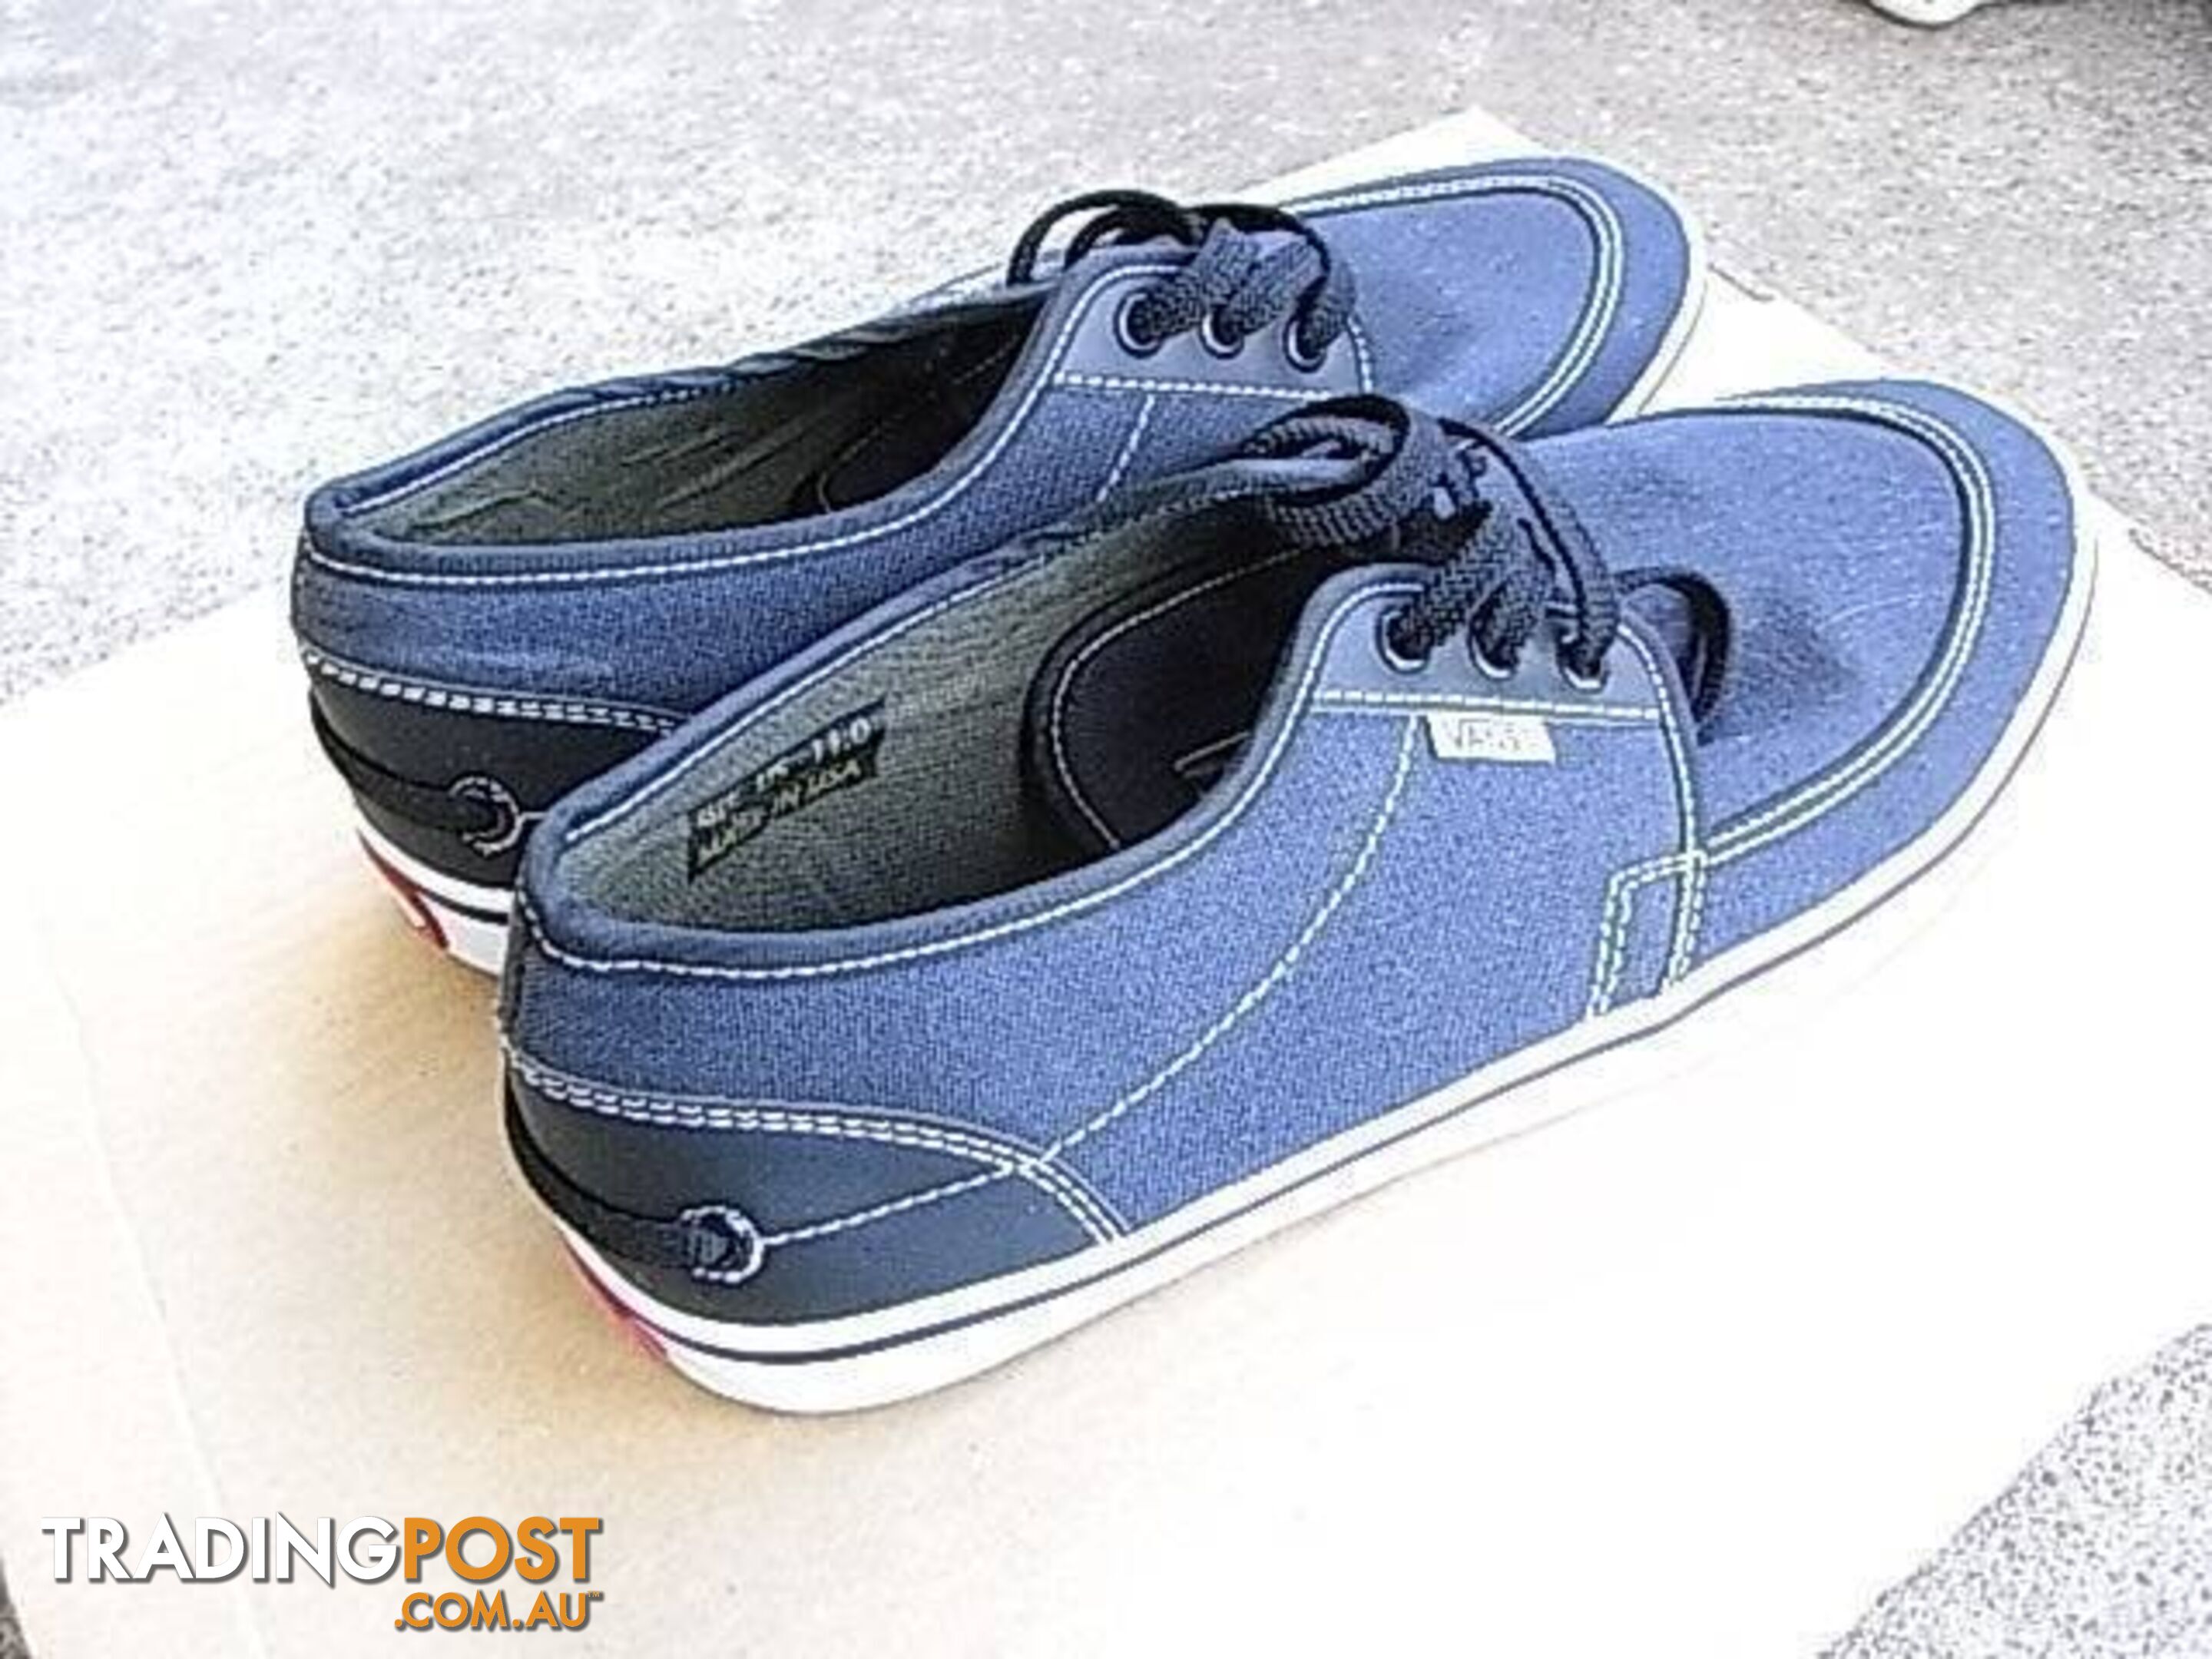 VANS OFF THE WALL SIZE US 11 MADE IN USA BRAND NEW call 047914295